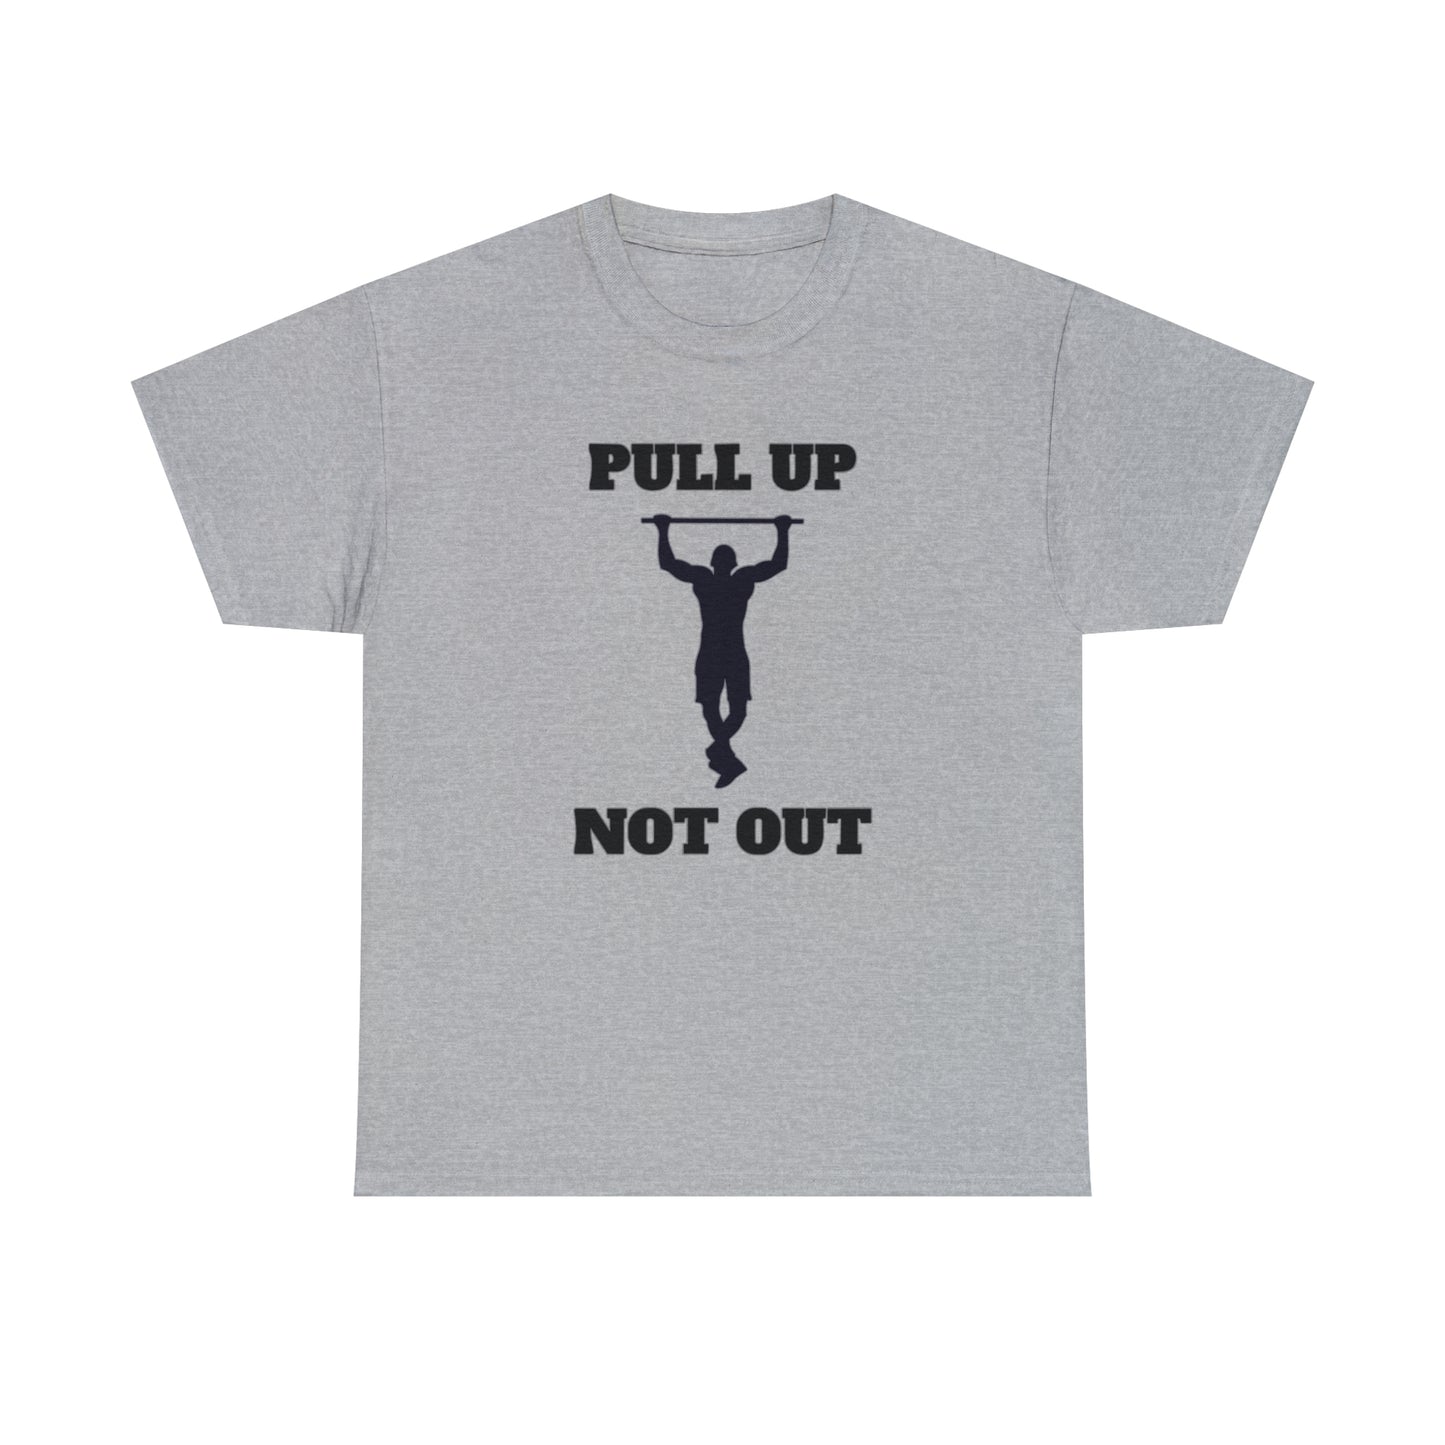 "Pull Up Not Out" Tee